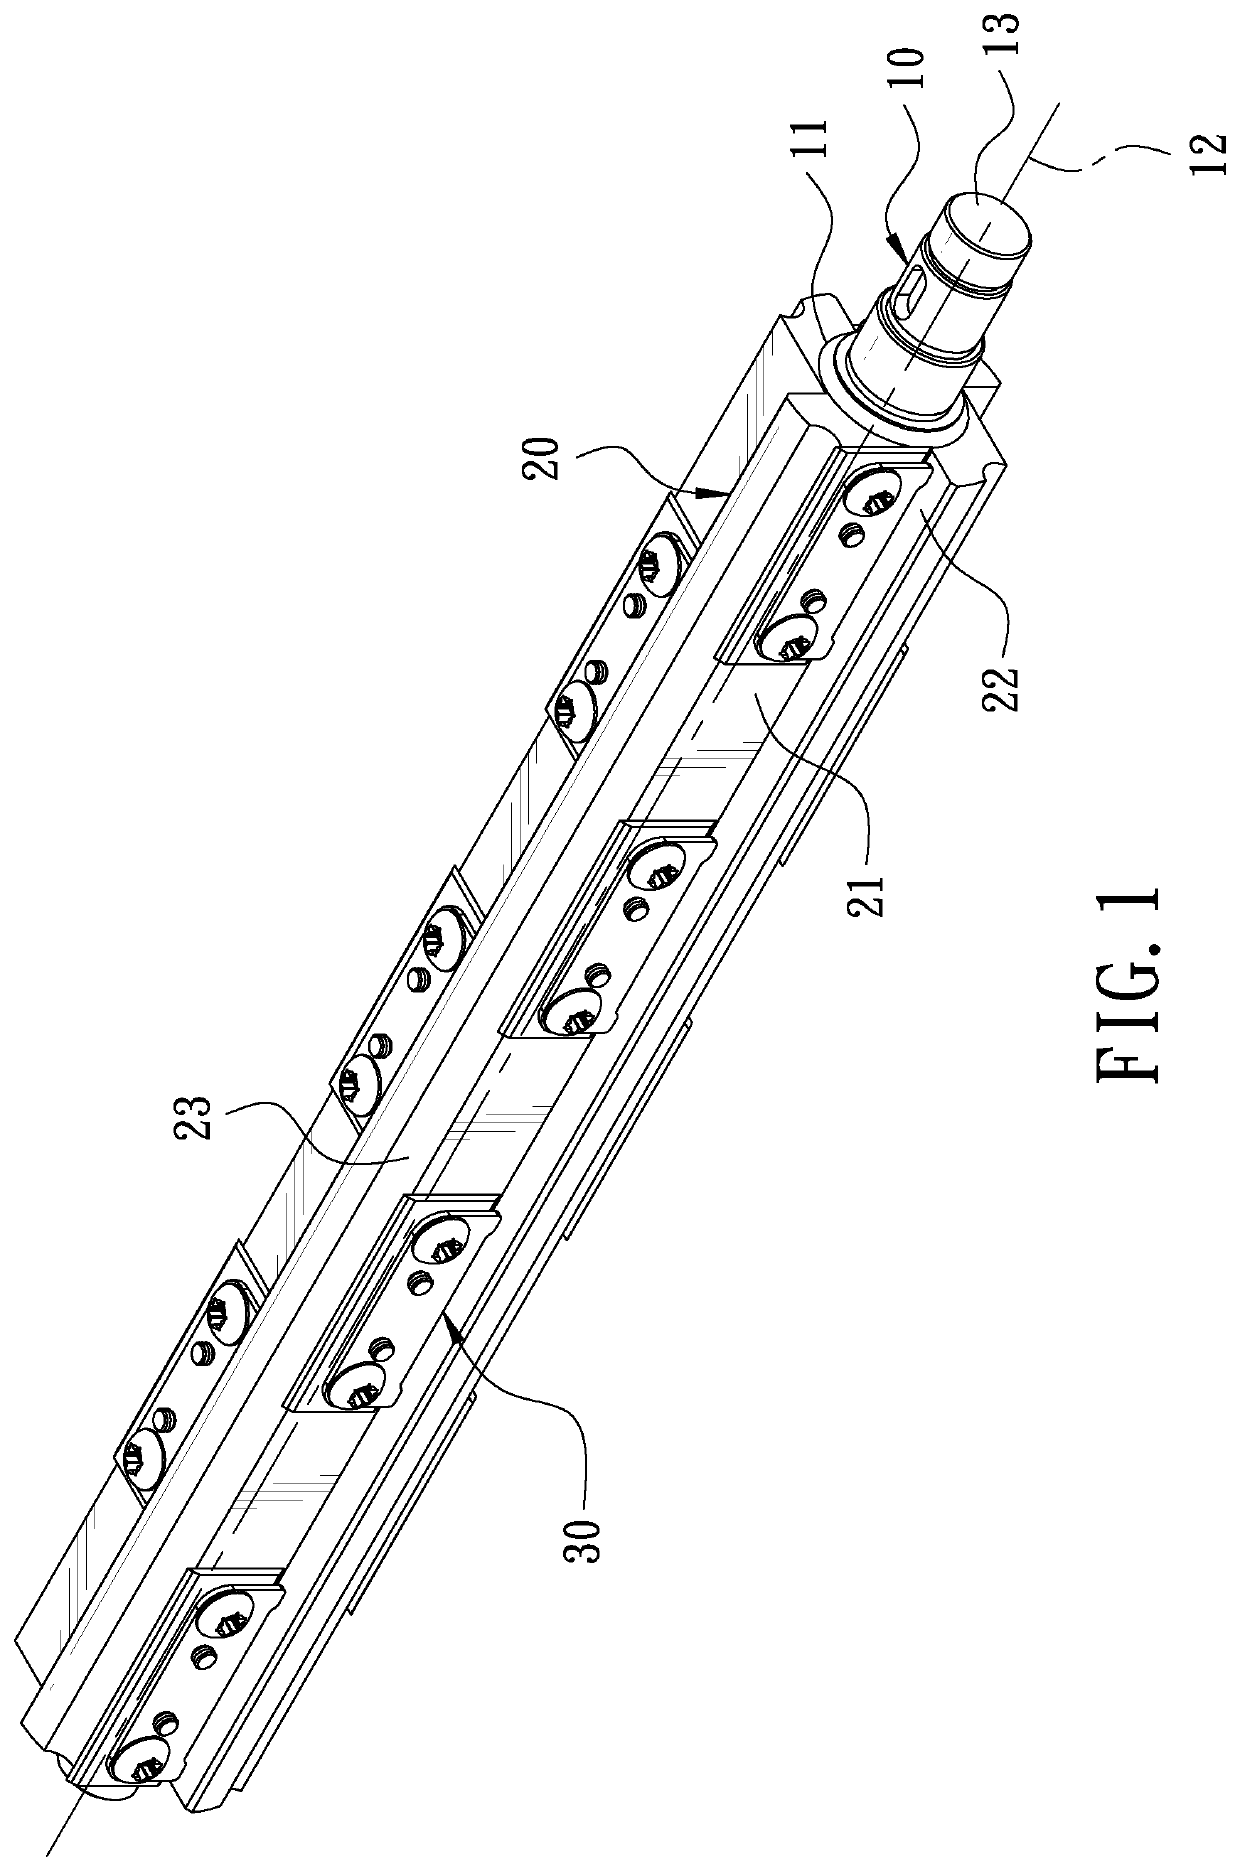 Adjustable multi-section blade structure for automatic planer